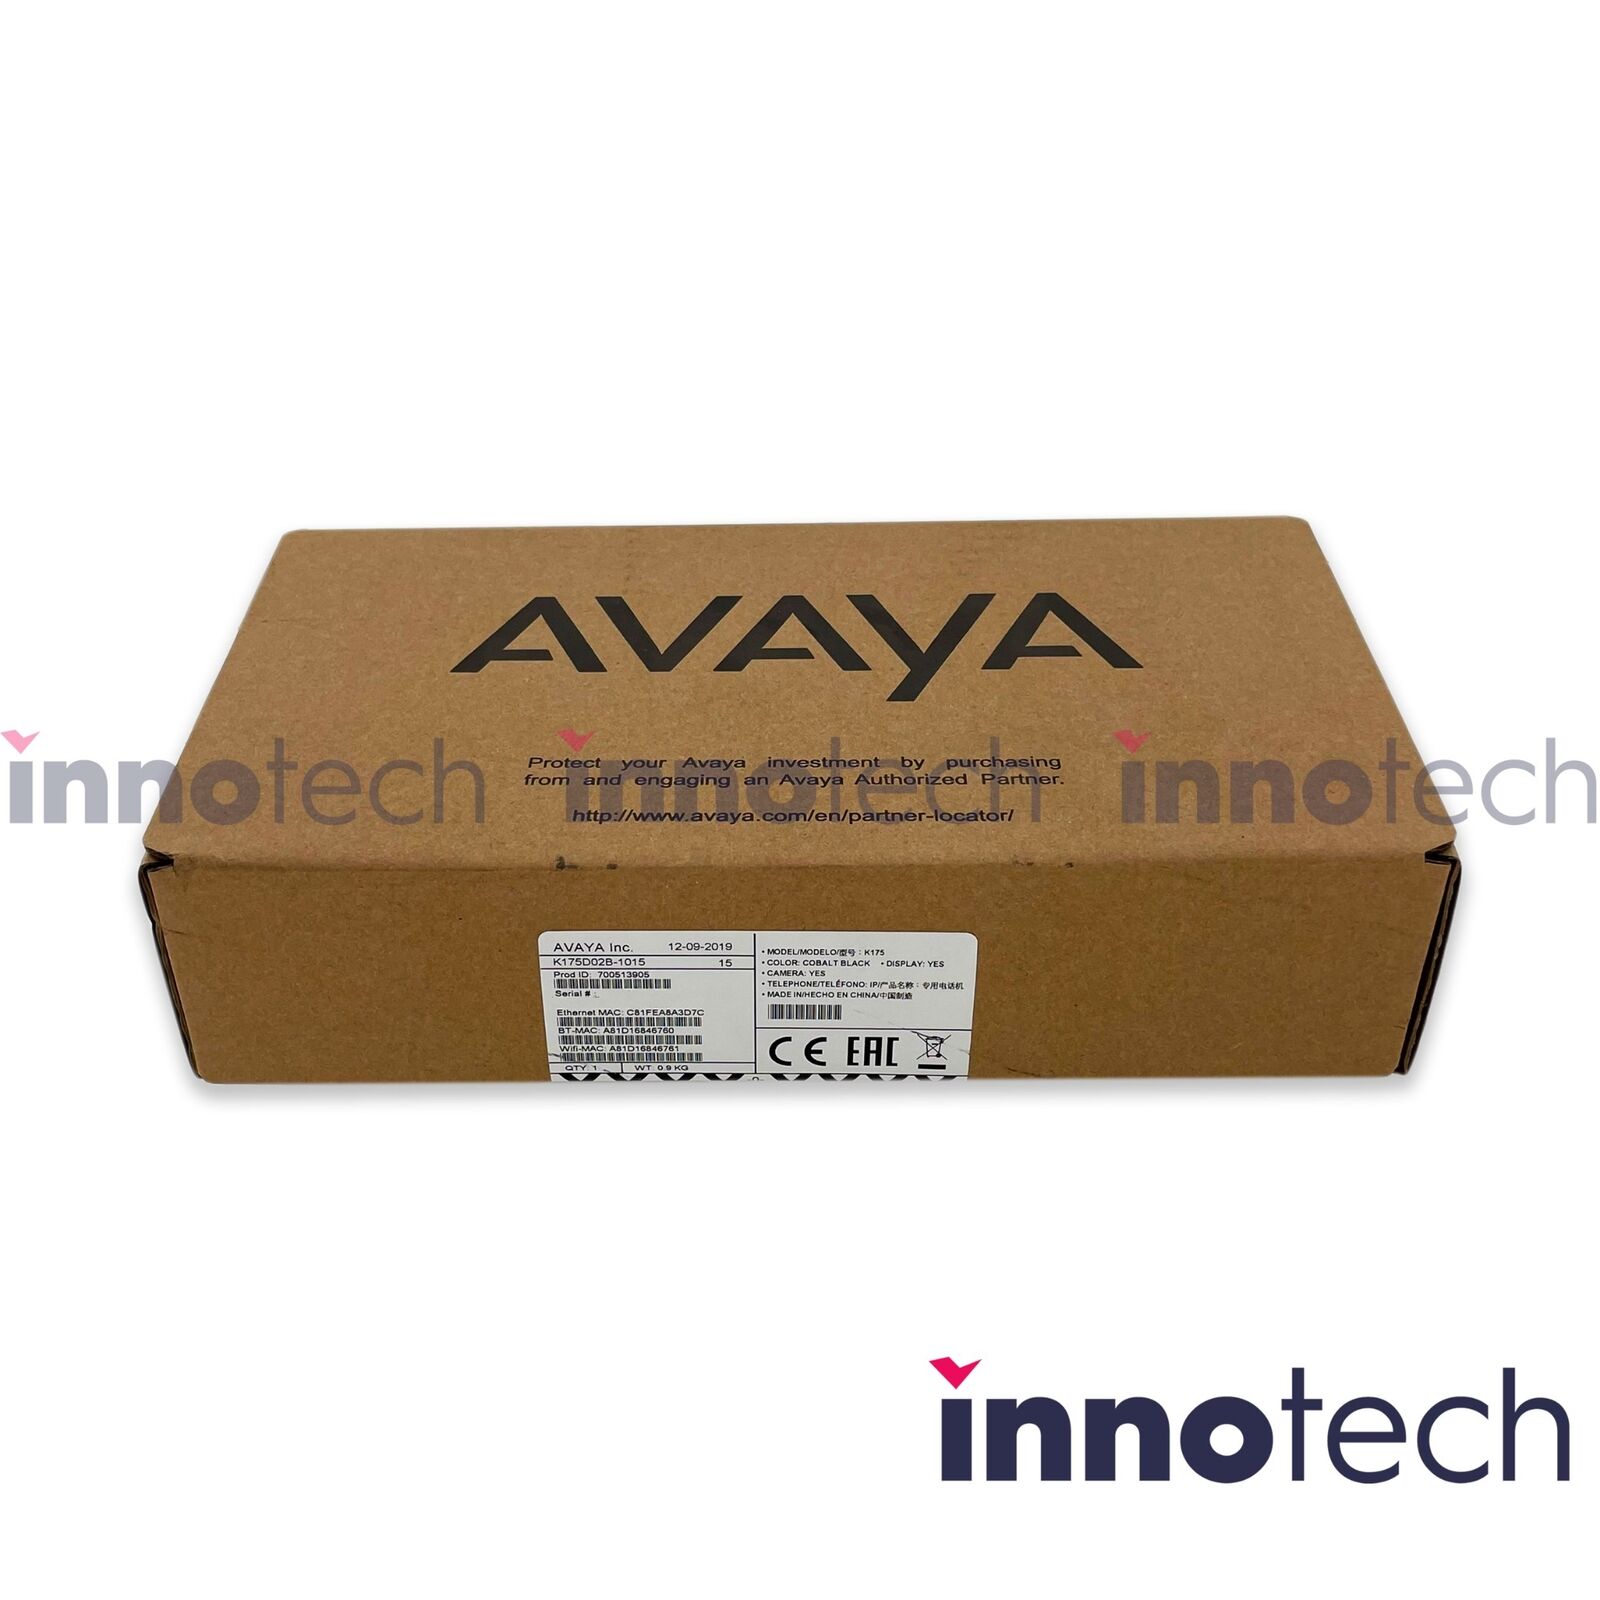 Avaya Vantage 700513905 K175 VoIP System Video Conferencing Device  New